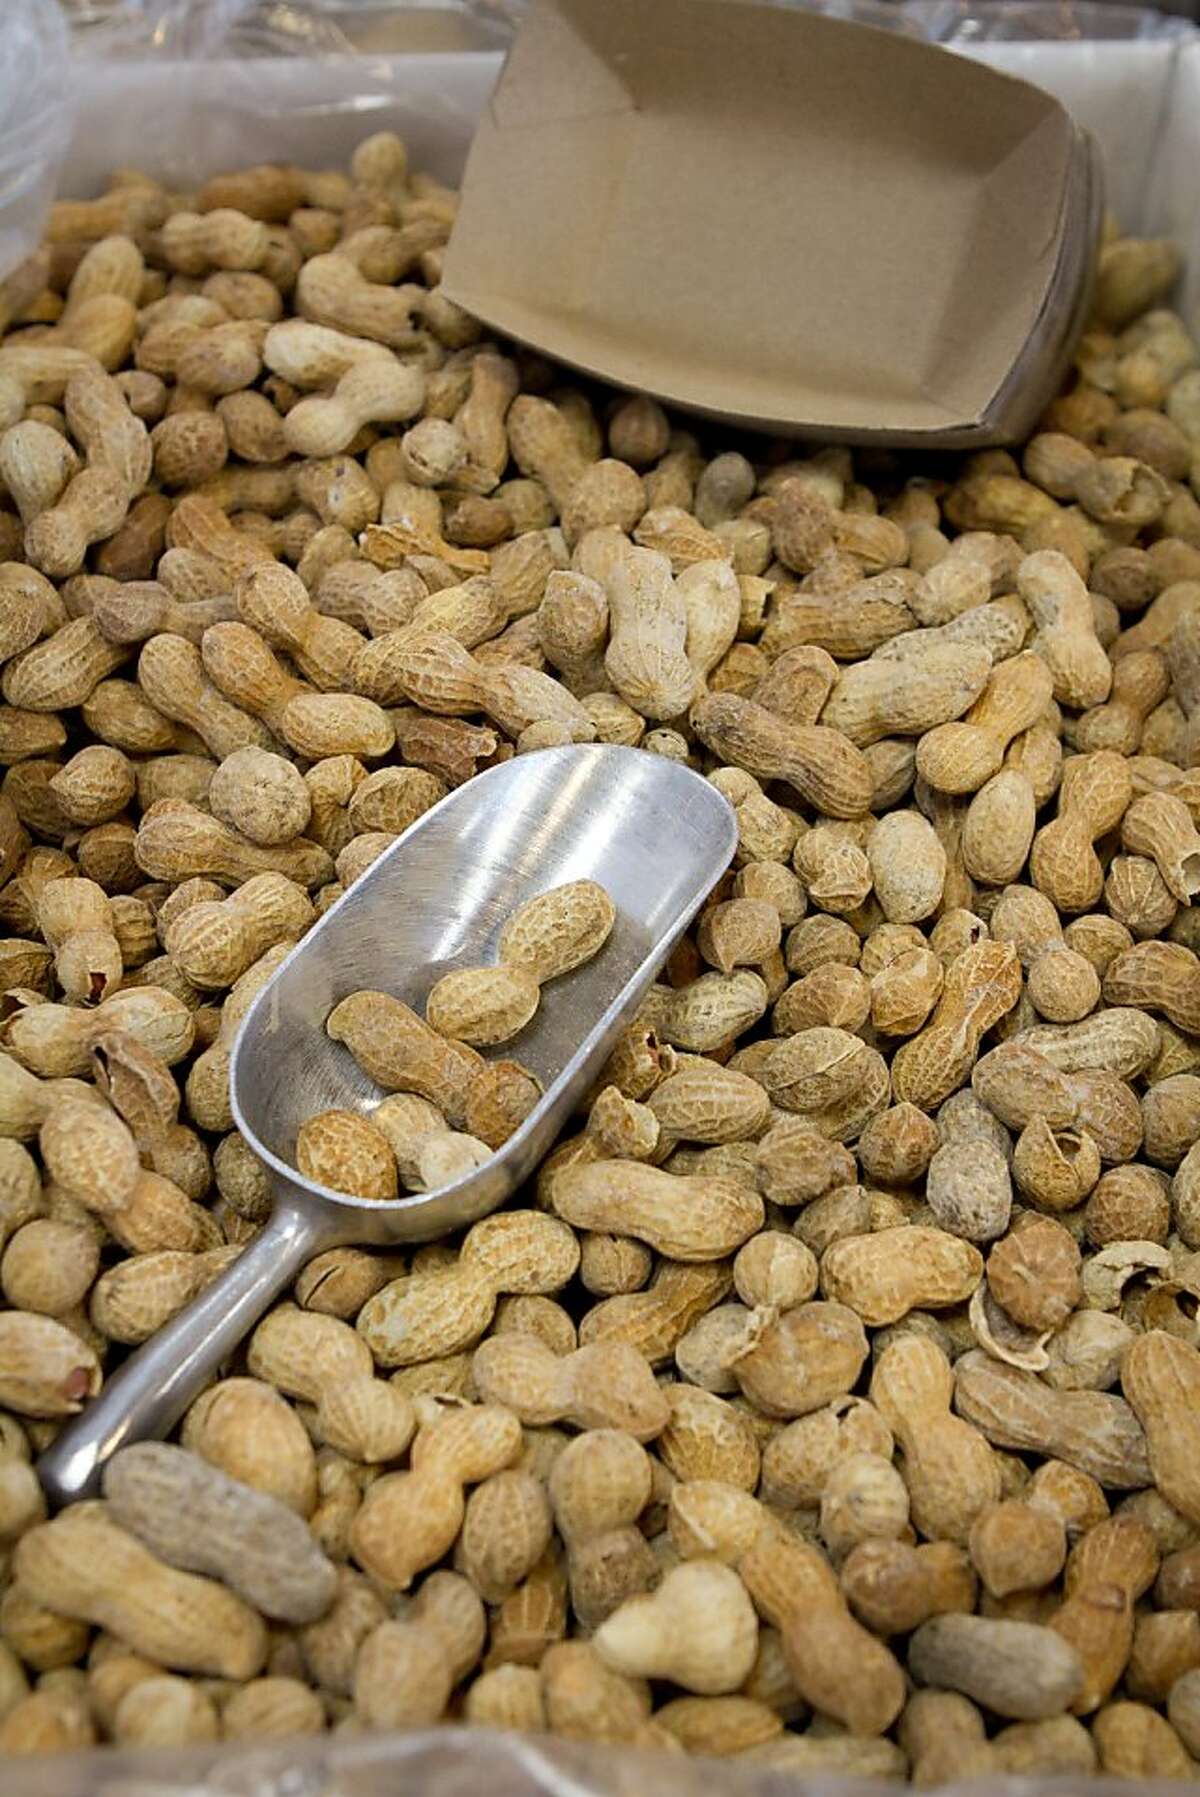 Peanuts for snacking on while people wait for their burgers at Five Guys Burgers in Burlingame, Calif., on Thursday, February 2, 2012.